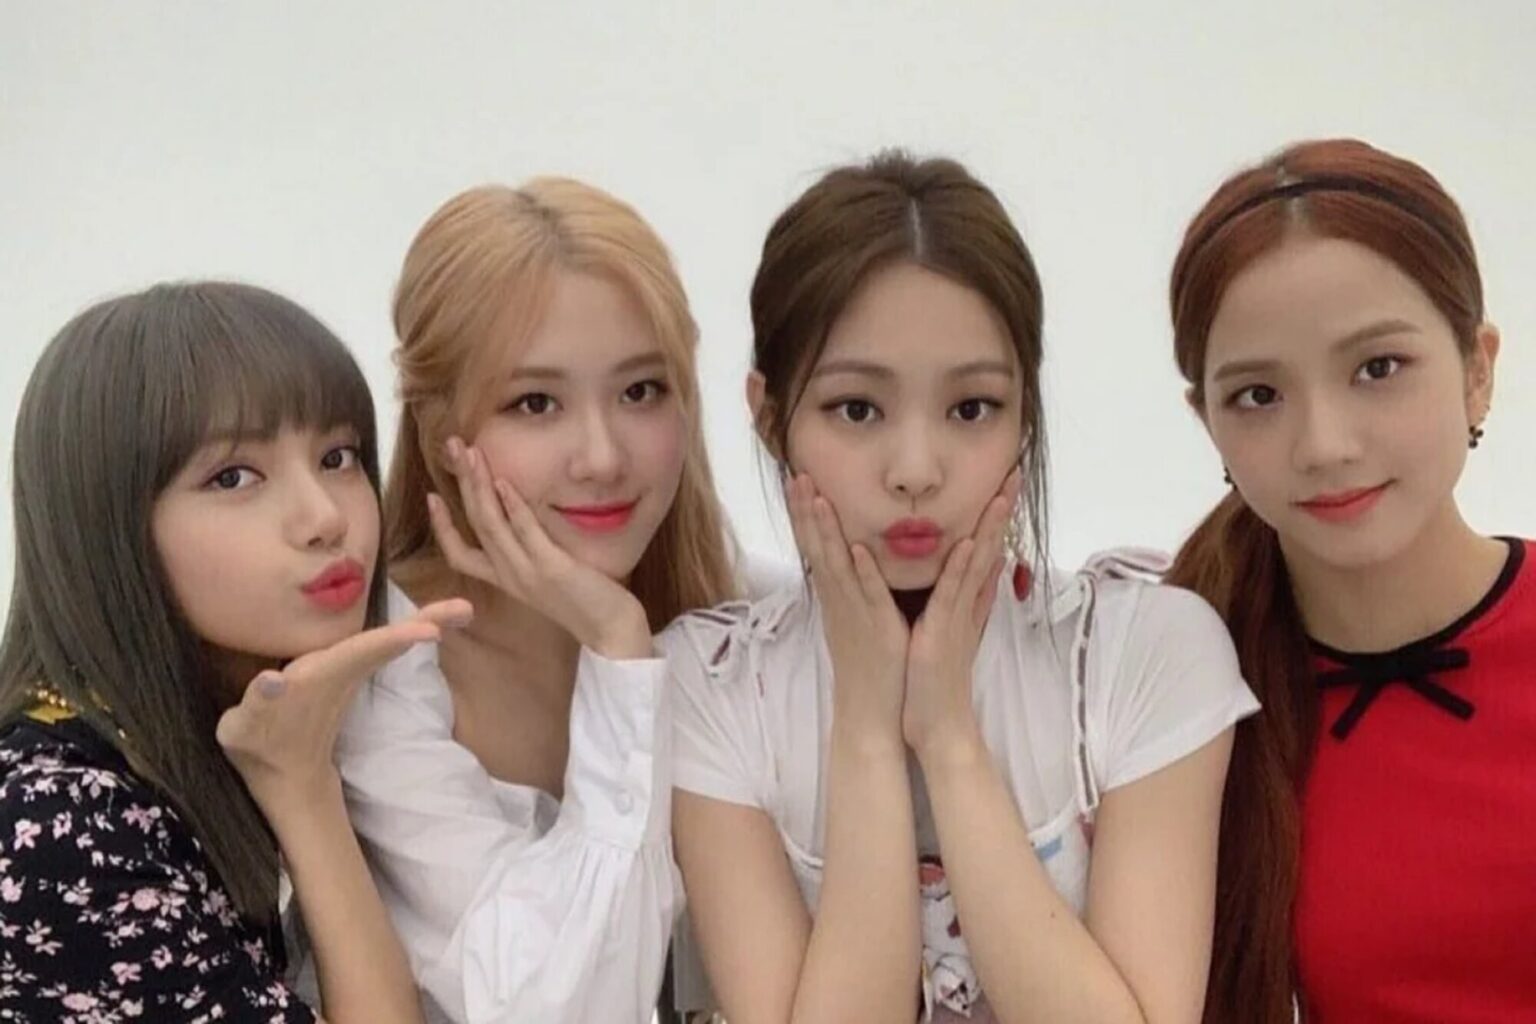 Blackpink fans have always expressed their mistrust against YG Entertainment, so why are Blinks upset with the company now? Find out the allegations here.